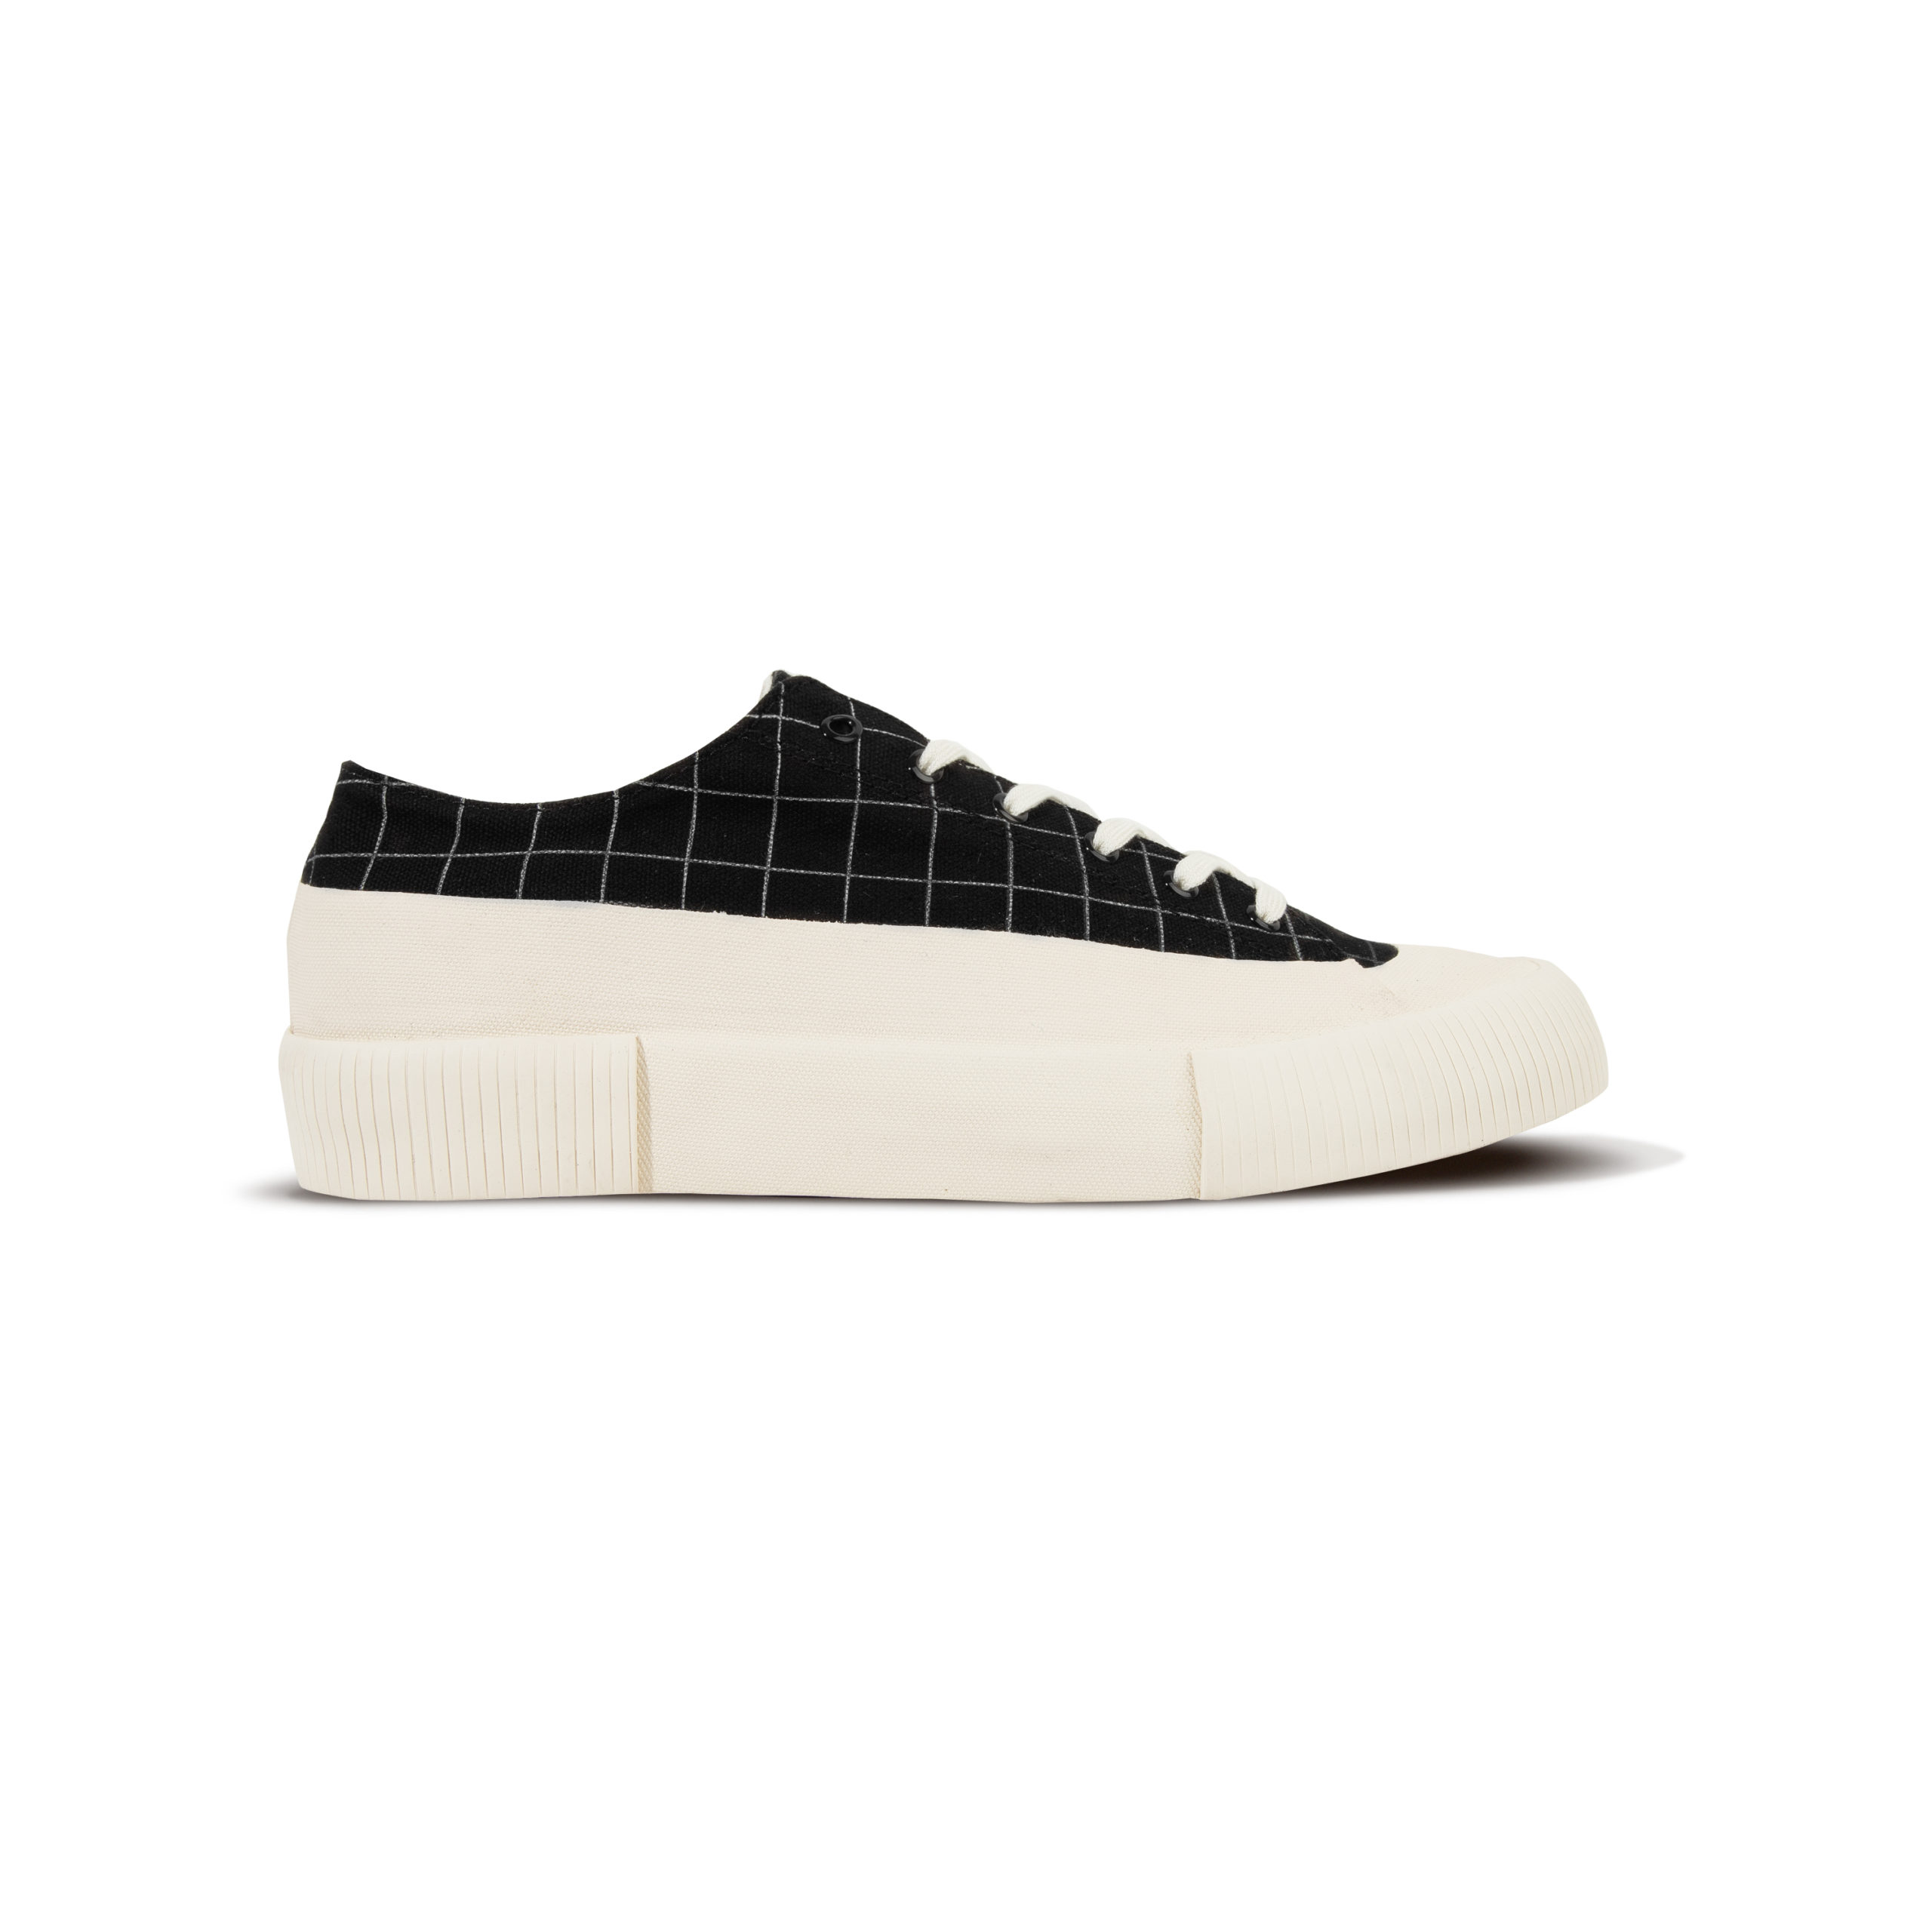 Arise Groov Shoes - Low Grid Canvas Black - Well Bred Store